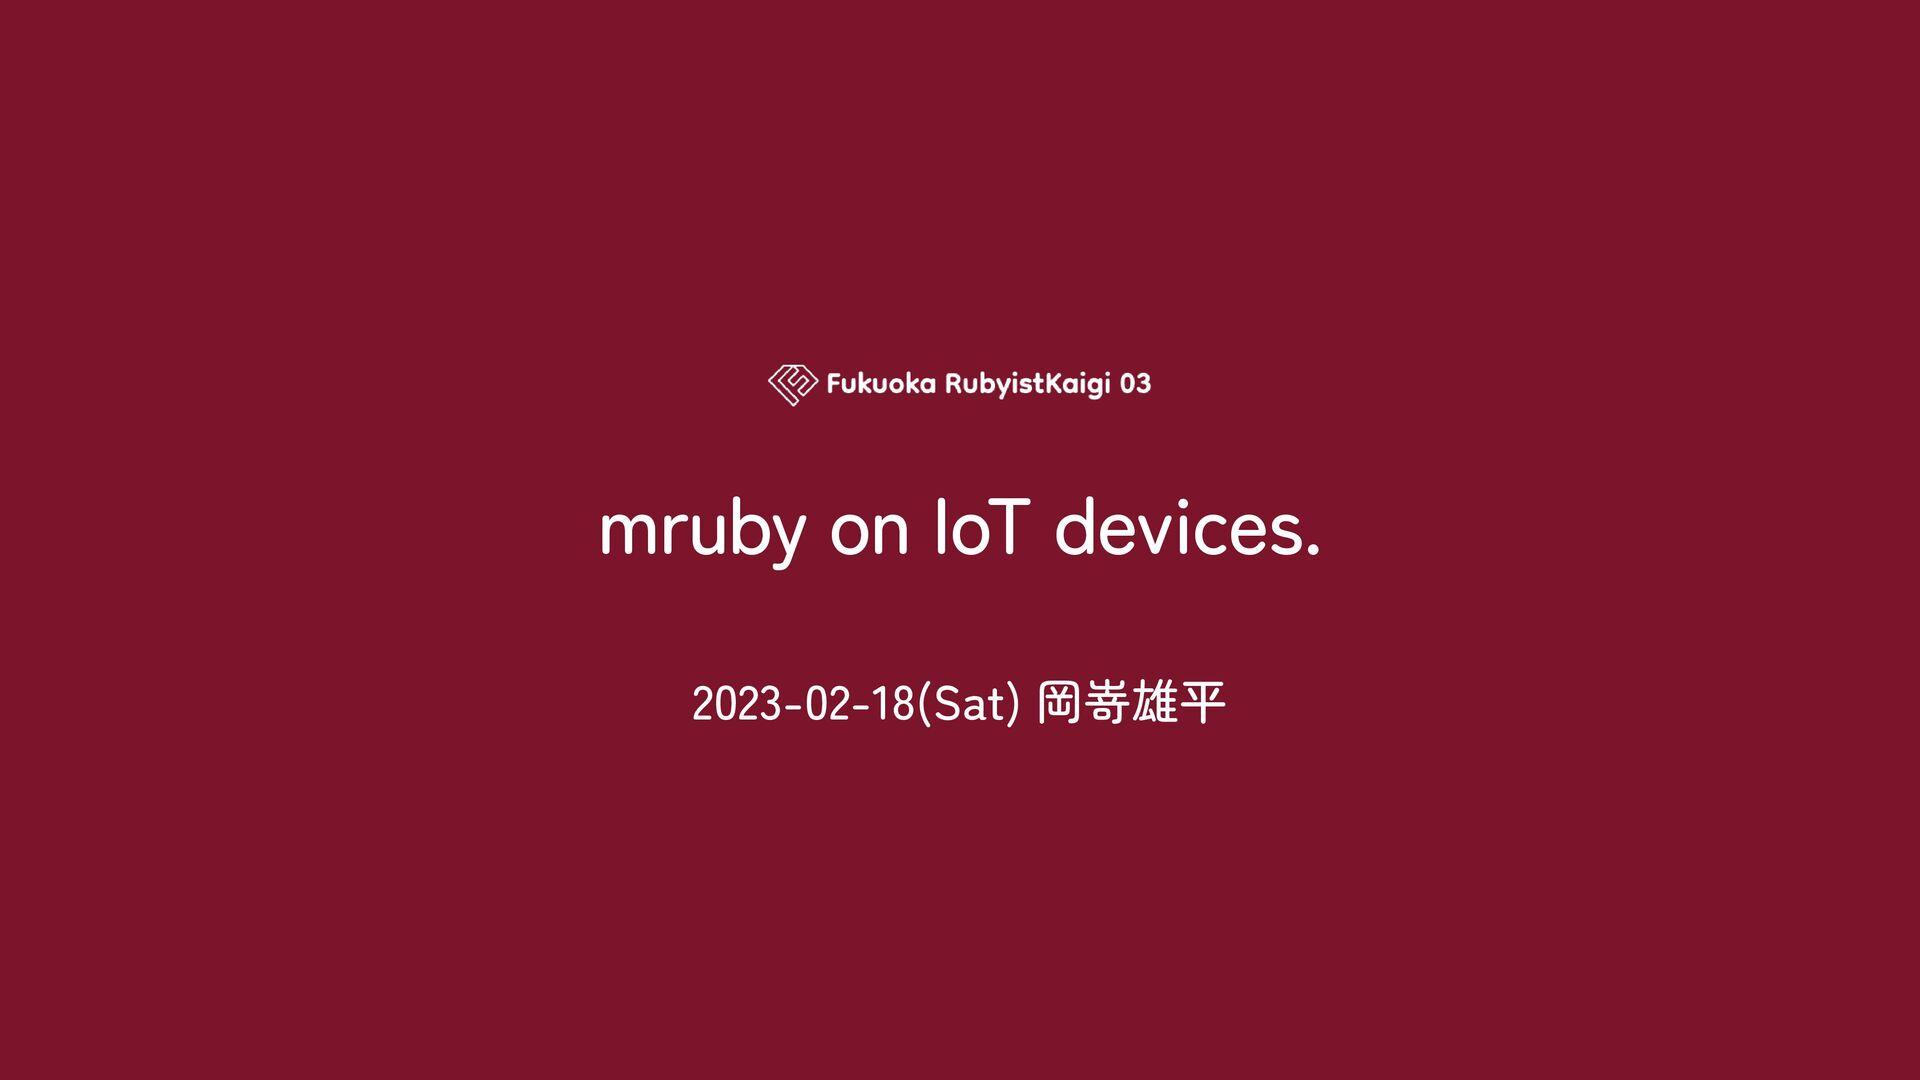 mruby on IoT devices.